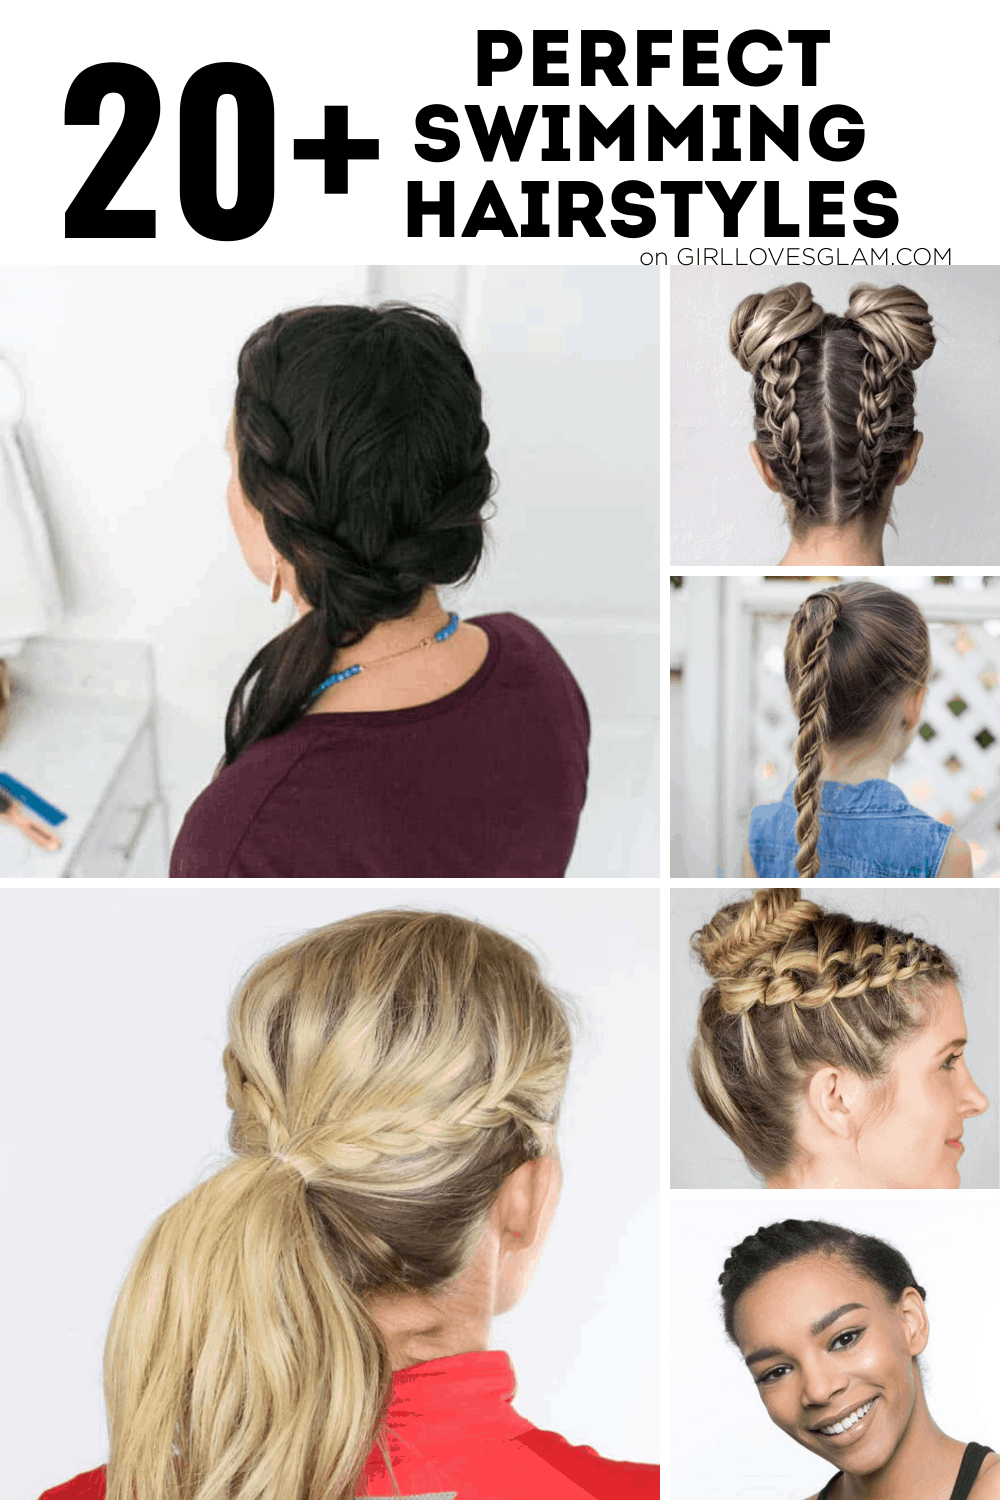 This Classic Updo Is The Best For Fine Hair